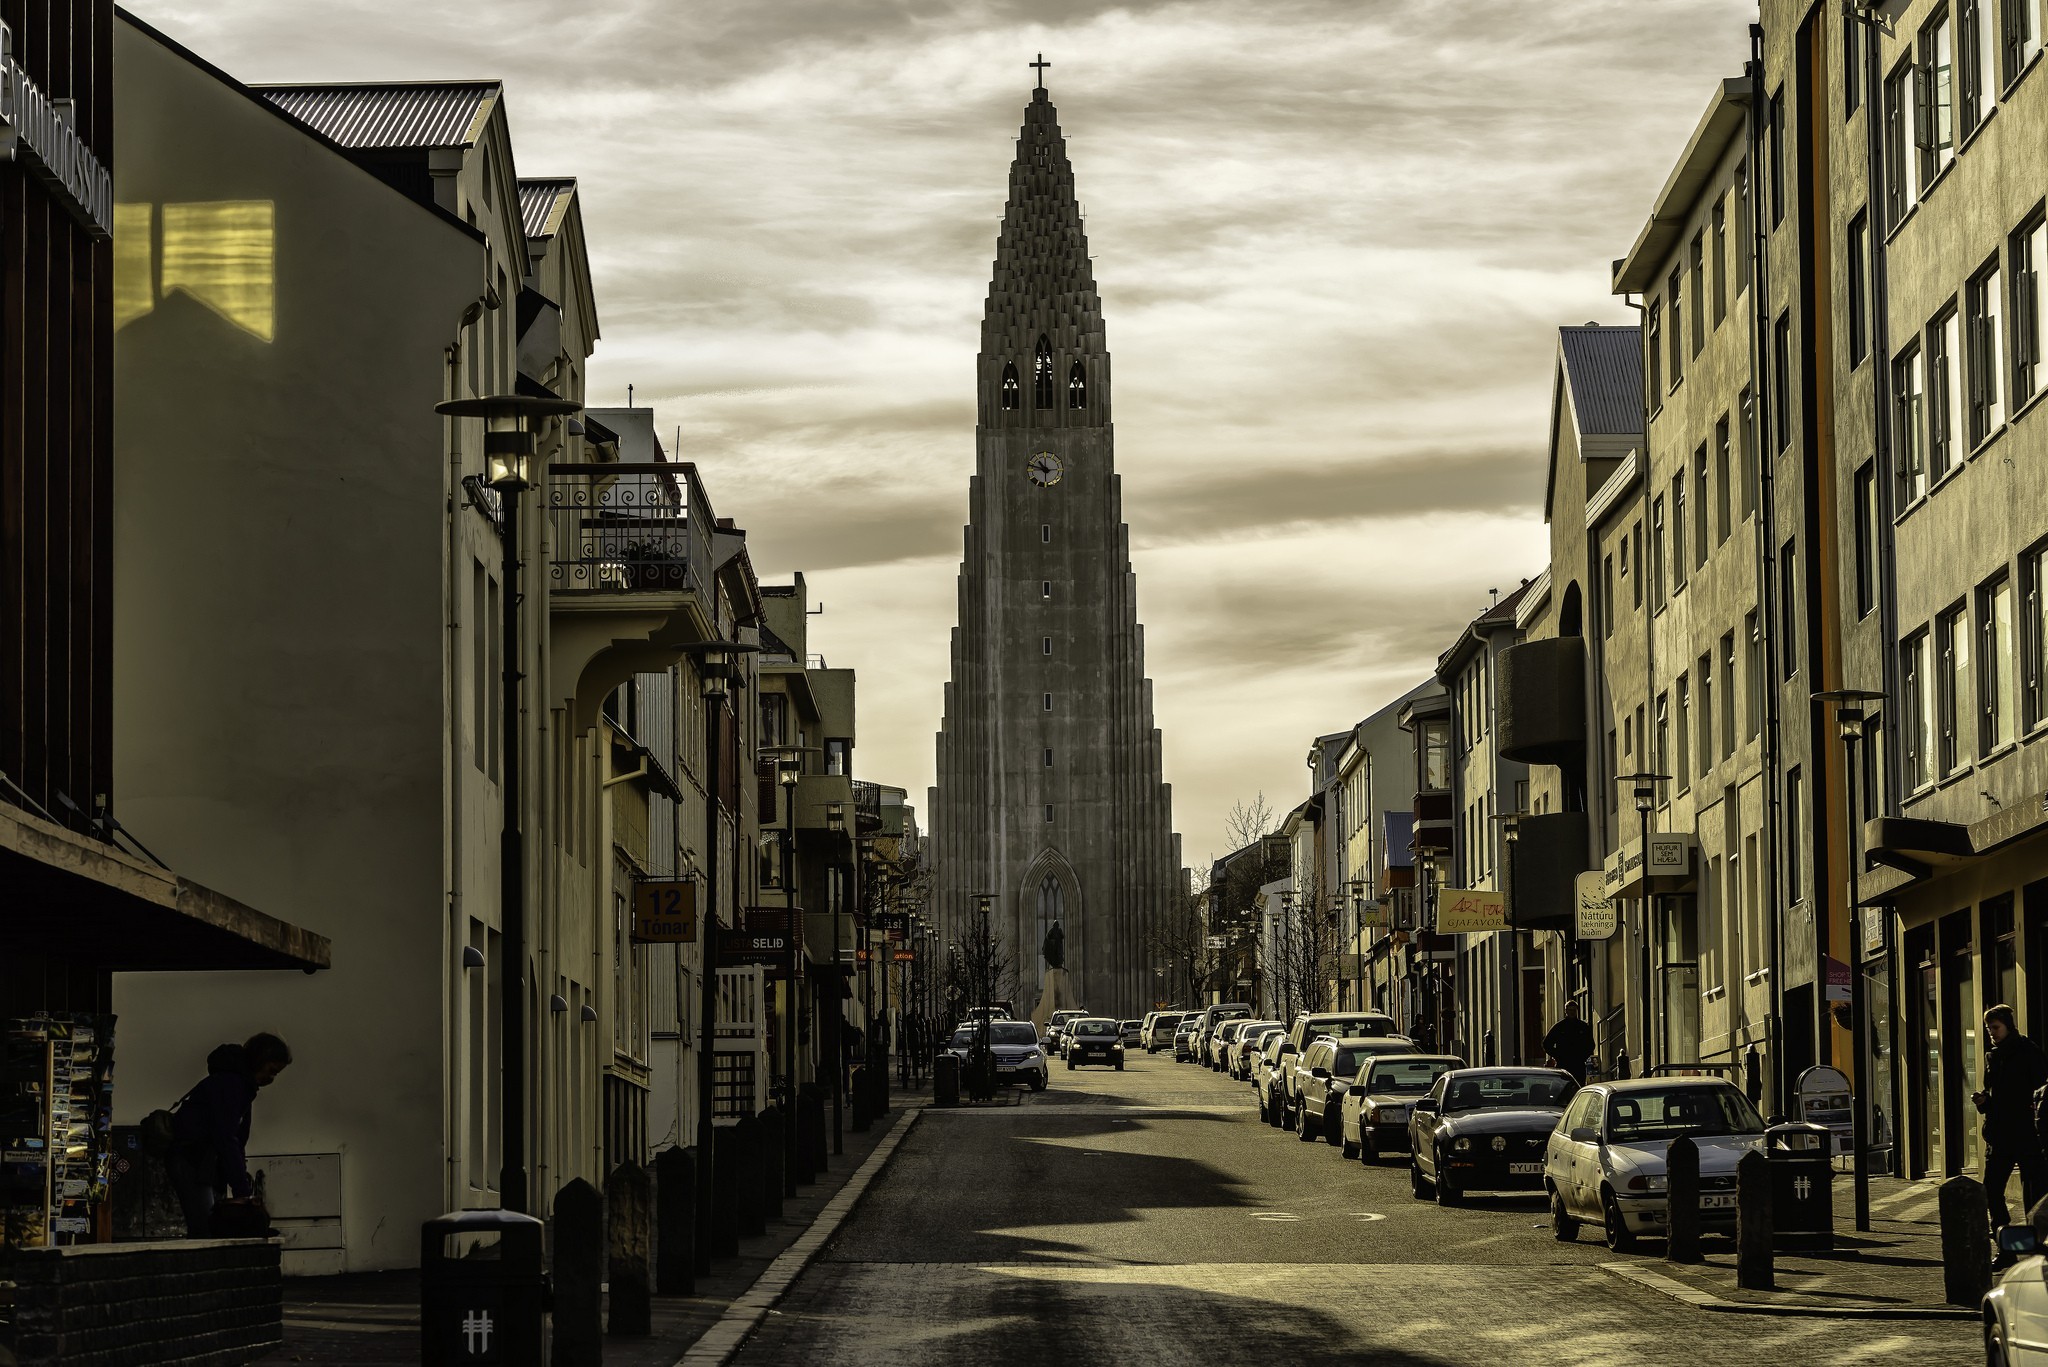 city, Cityscape, Architecture, Building, Clouds, Reykjavik, Capital, Iceland, Street, Church, House, Car, Balconies, Cross Wallpaper